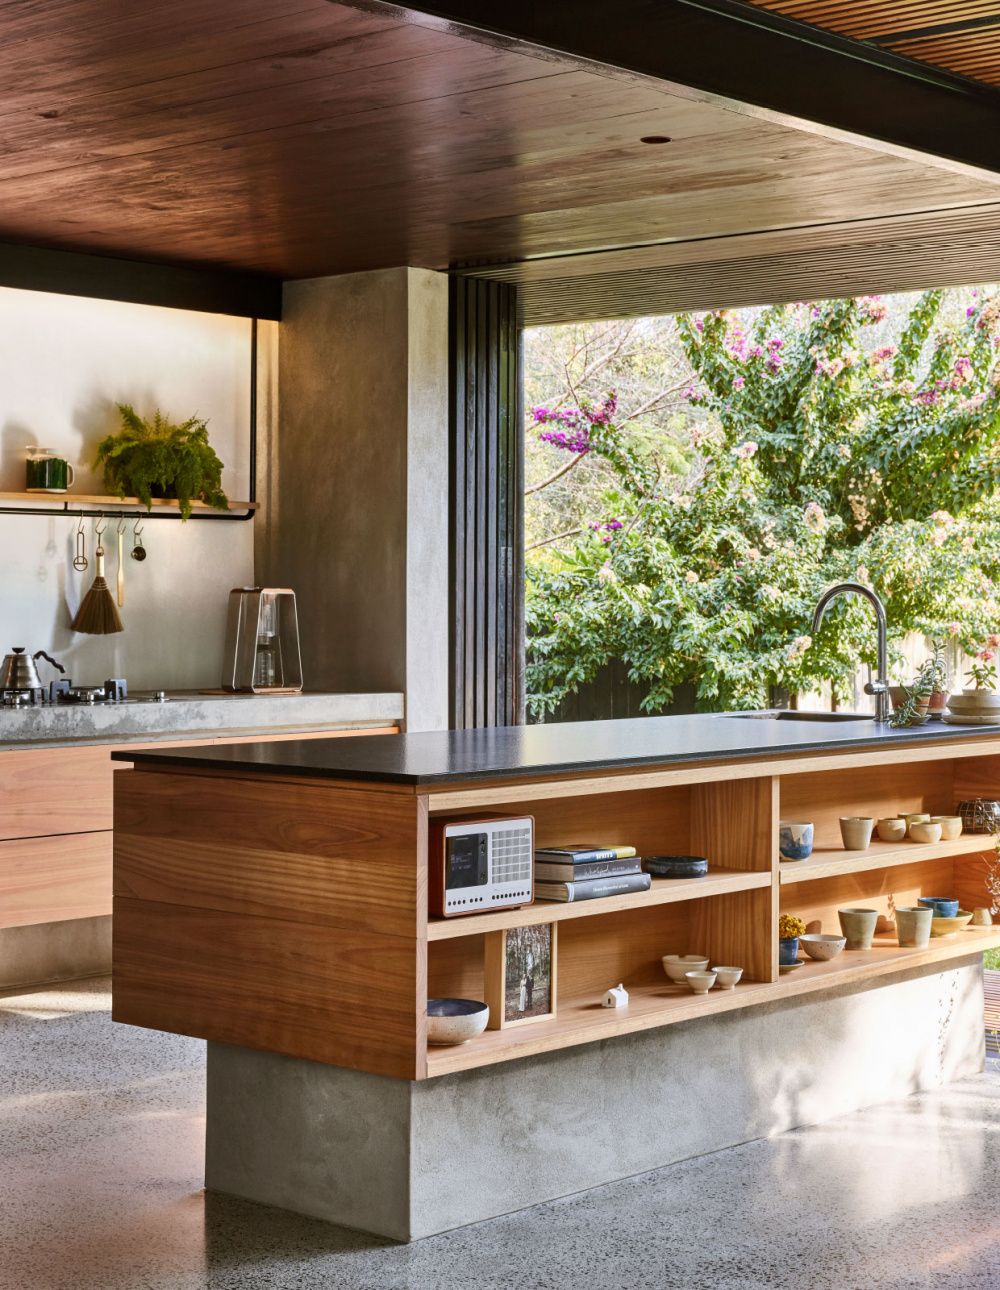 Open Kitchen Designs: Modern and Functional Spaces for Culinary Creativity